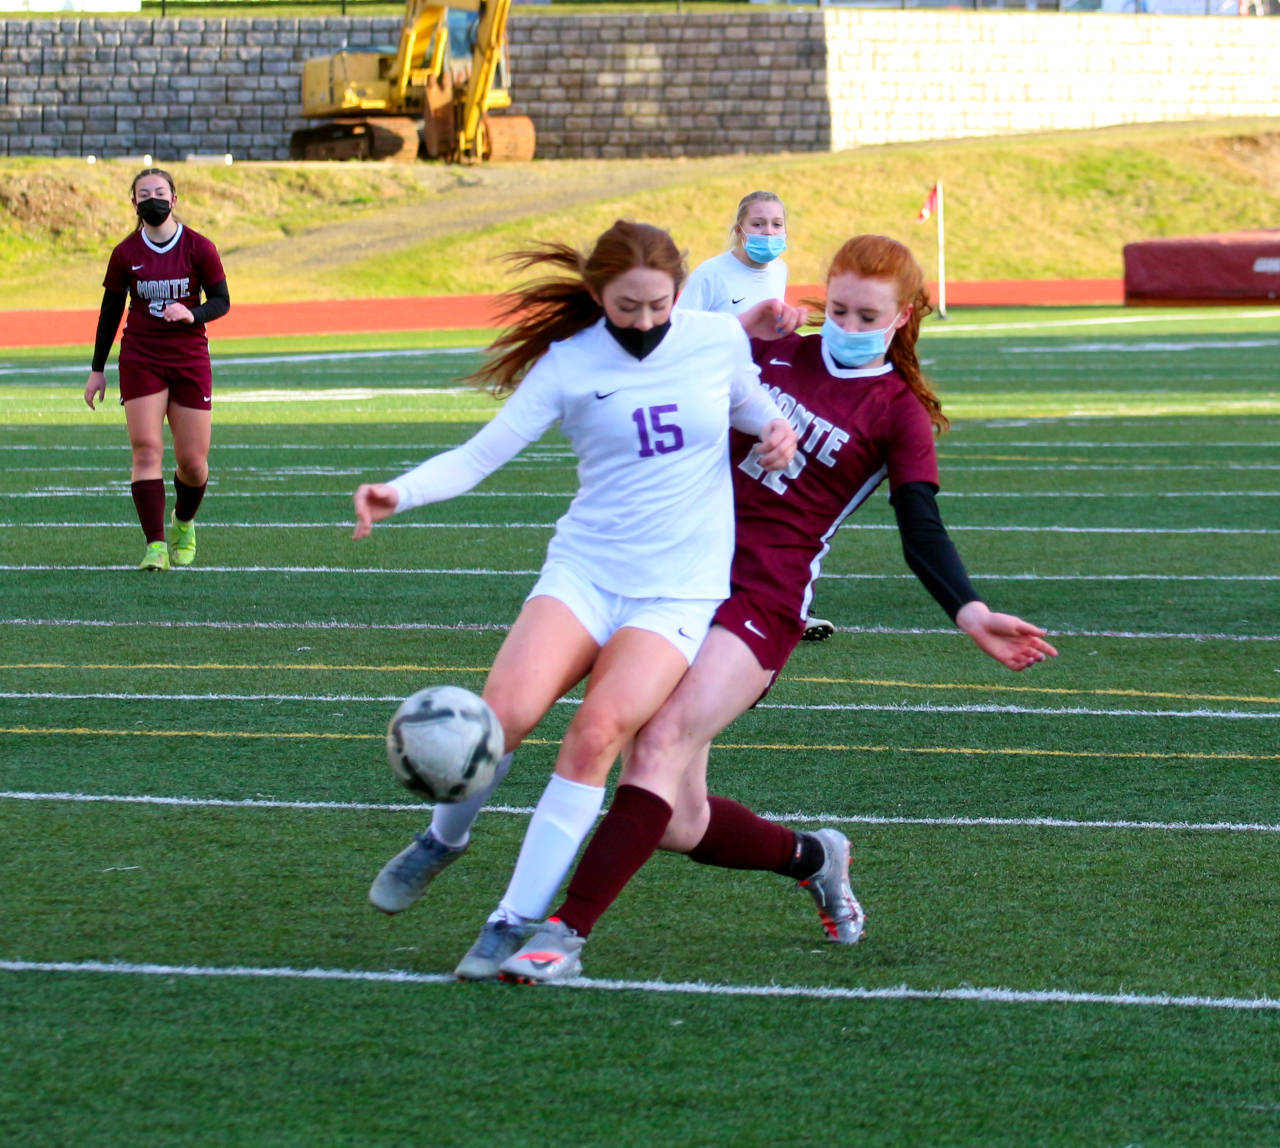 Montesano’s Zoee Lisherness, right, collides with Goldendale’s Payton Sheridan during a first-round district playoff game on Monday in Montesano. (Ryan Sparks | The Daily World)